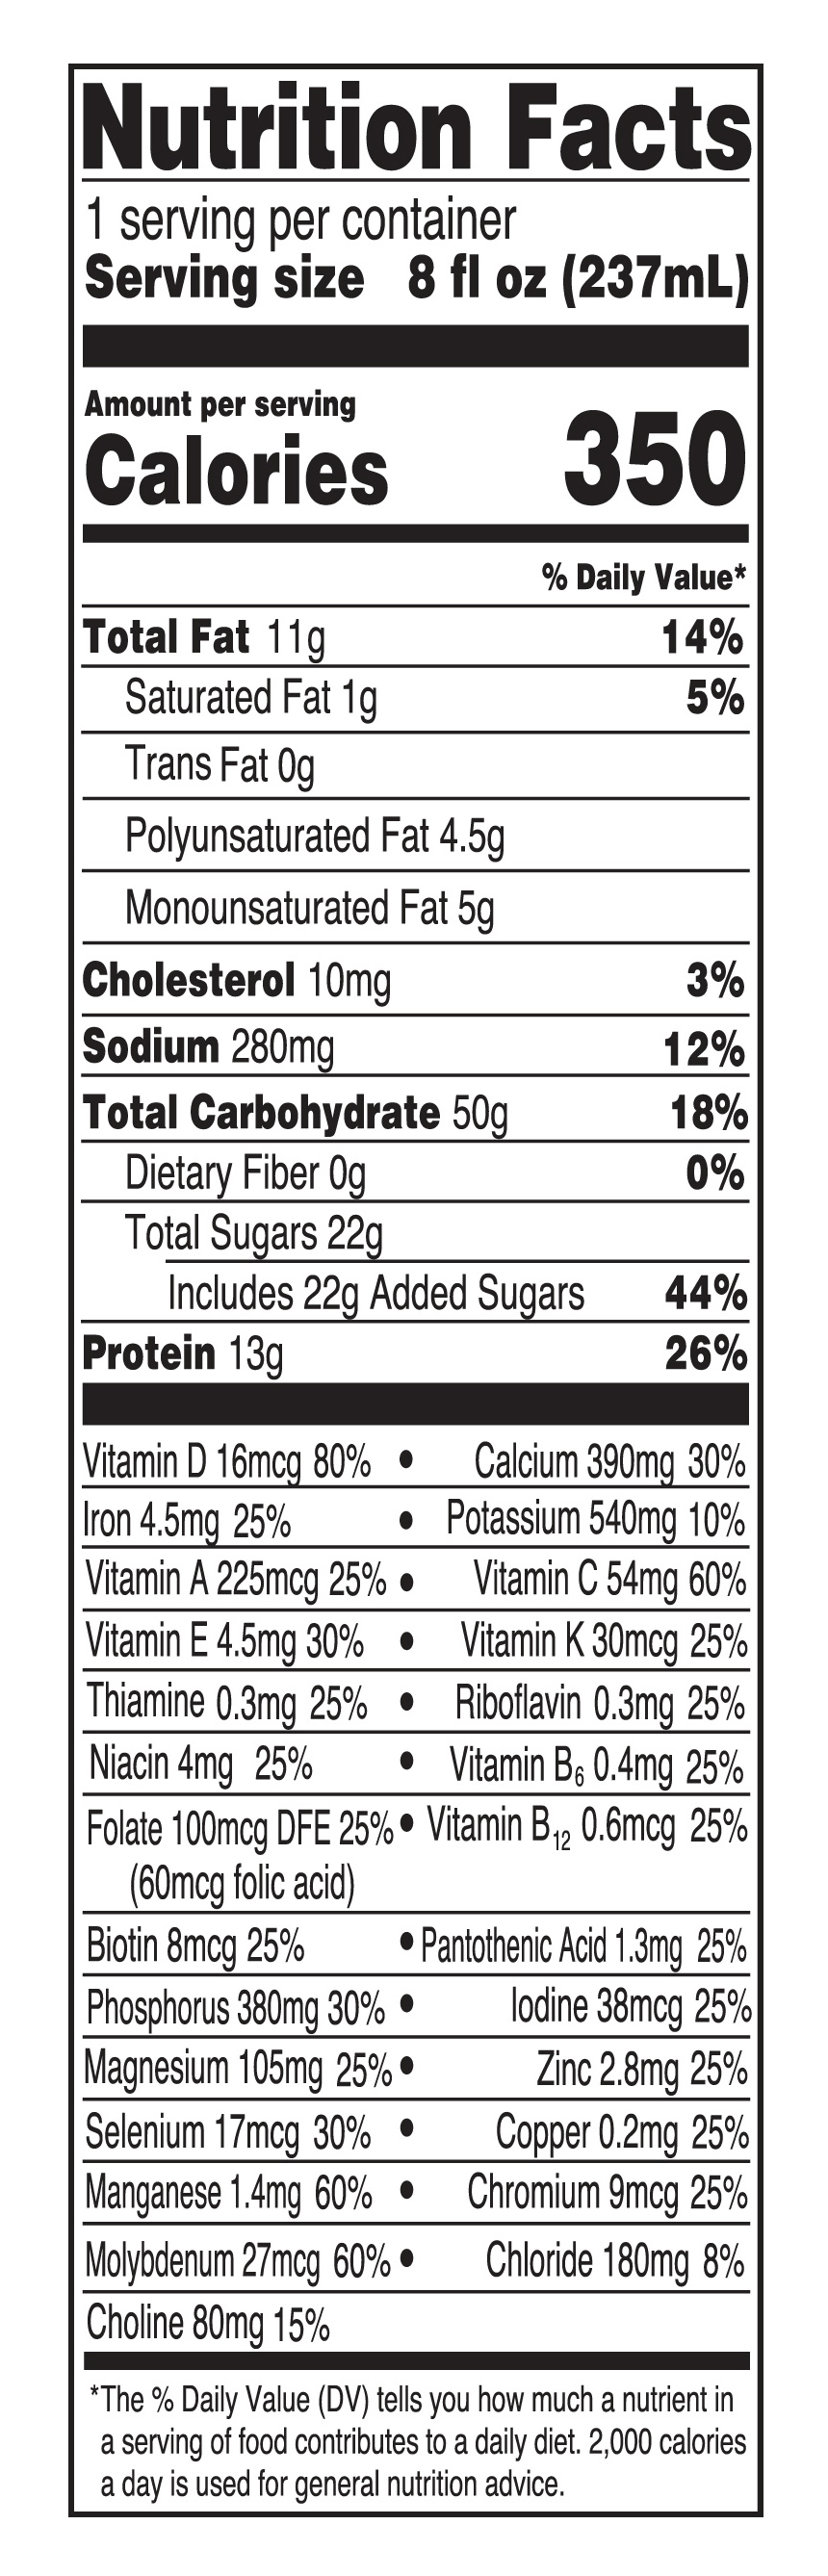 Equate Nutritional Shake Plus, Chocolate, 8 fl oz, 6 Count - image 4 of 10